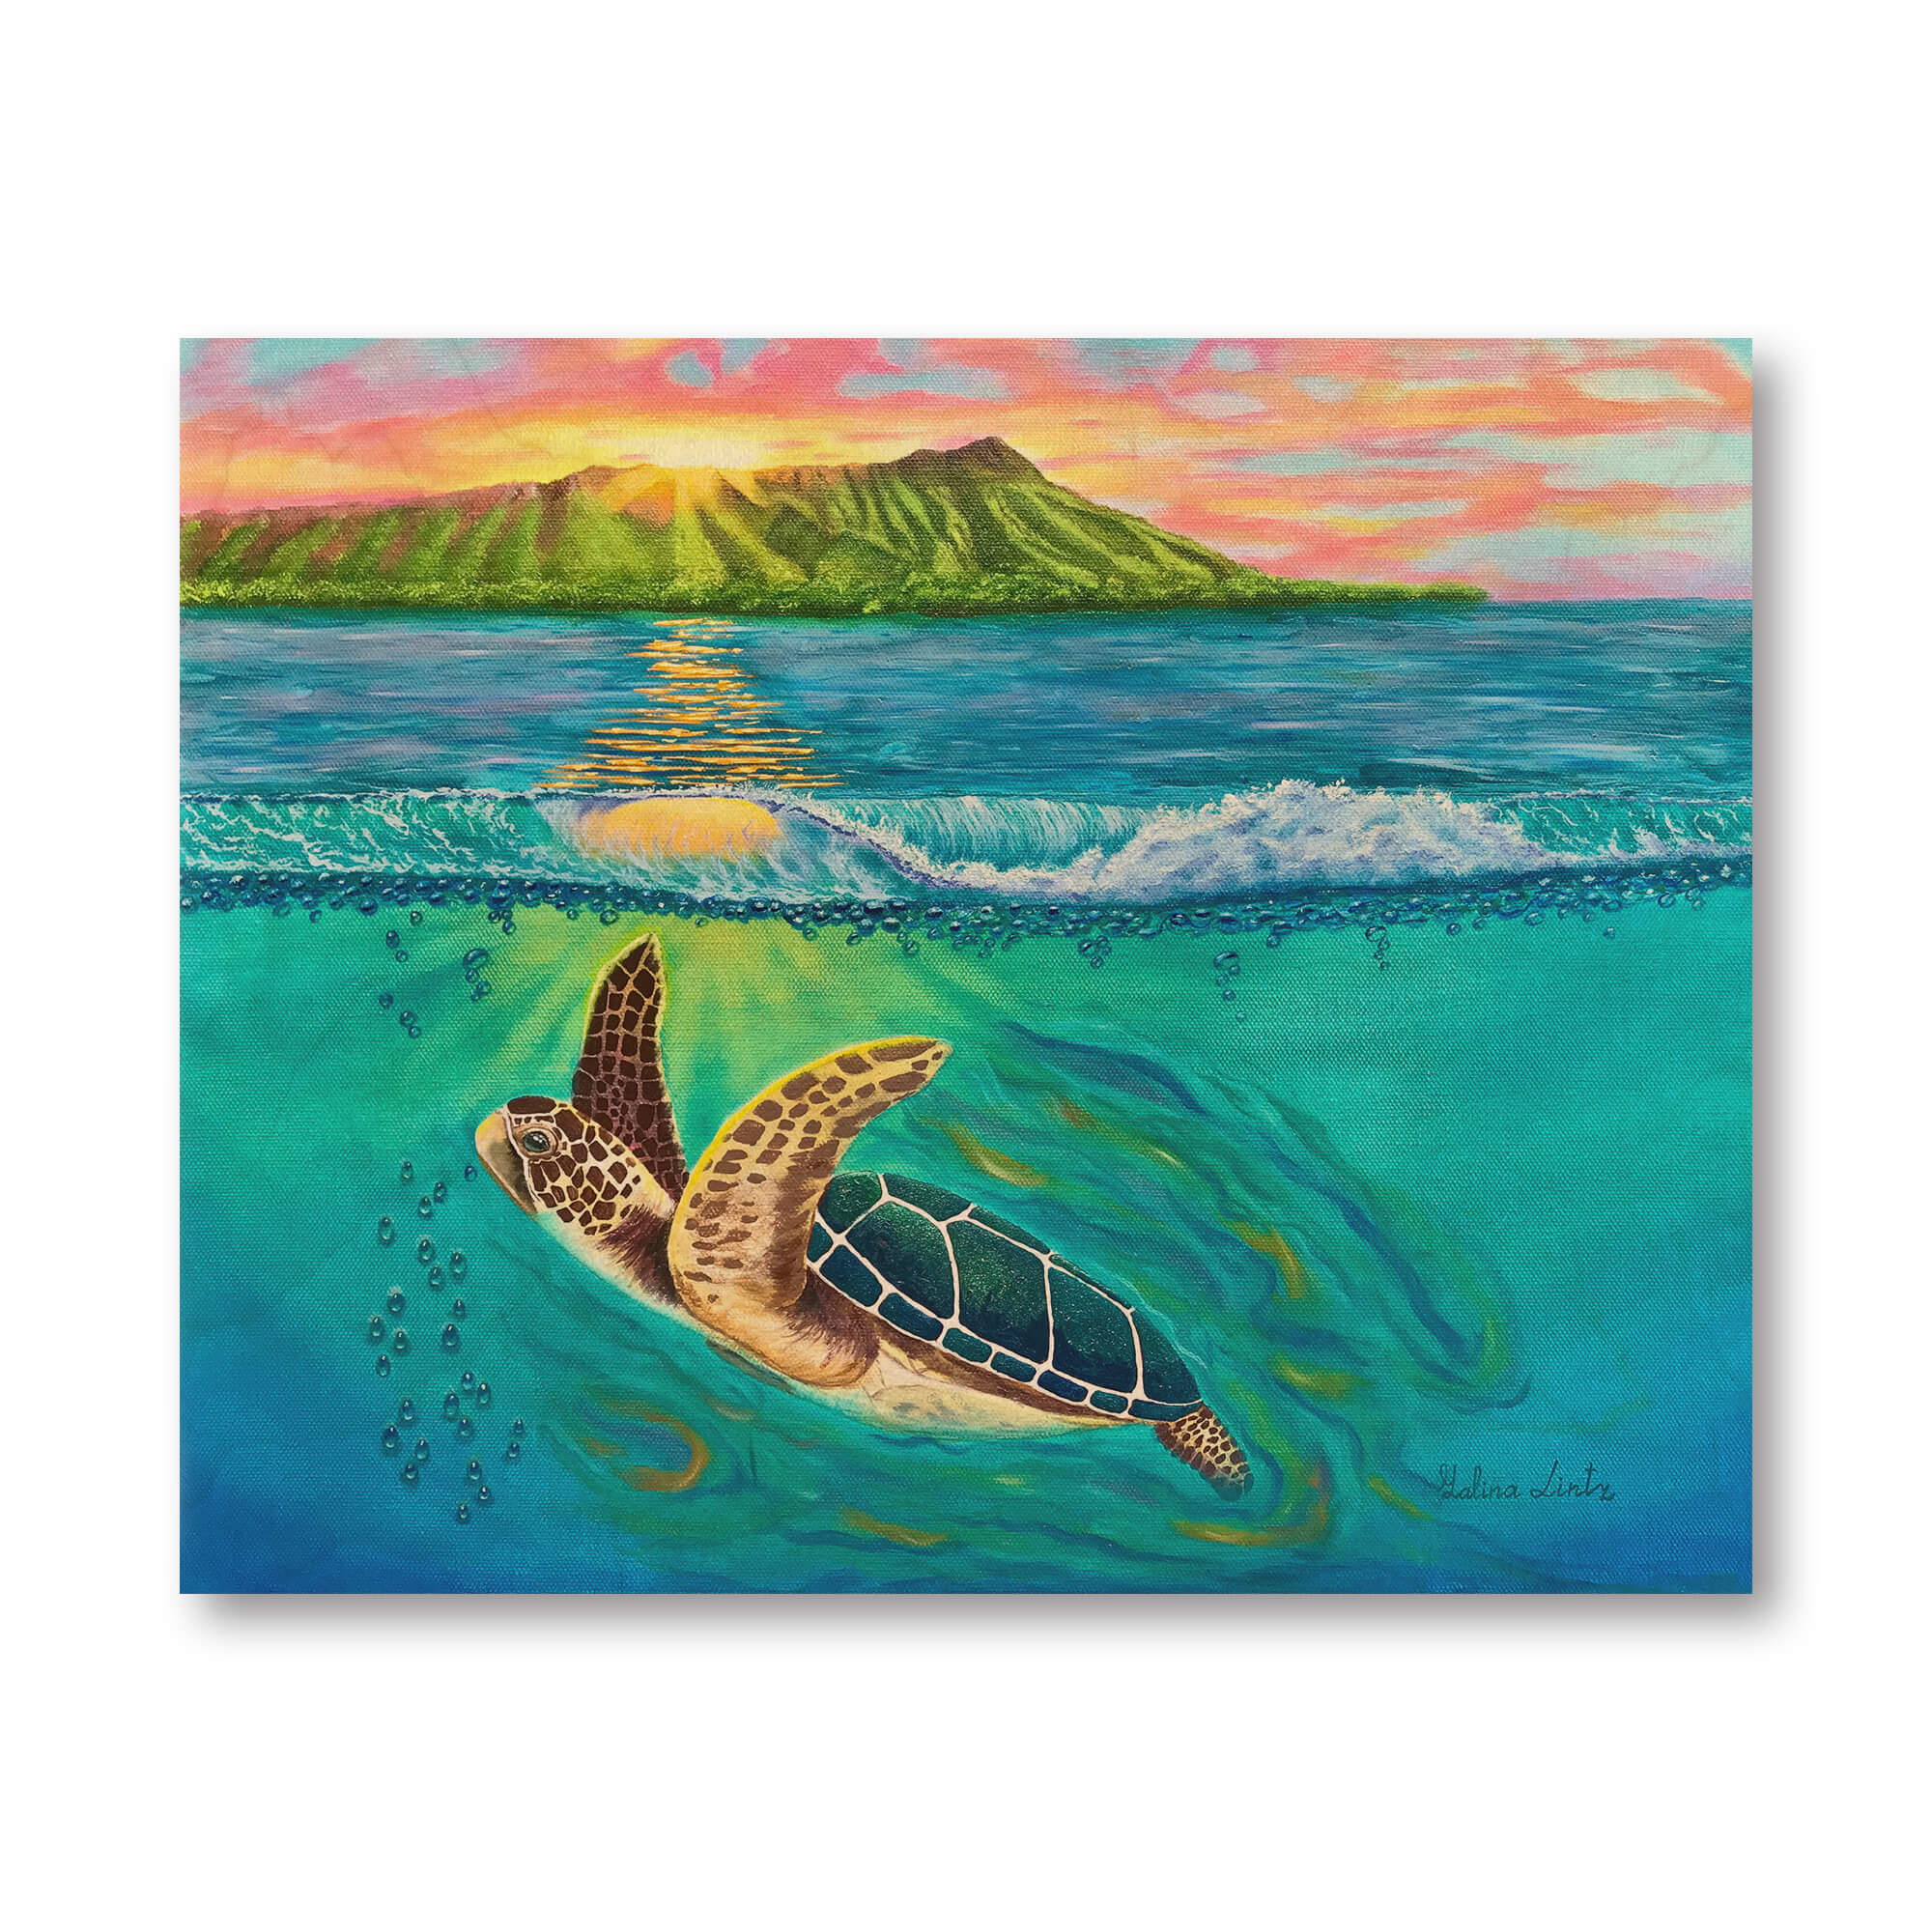 Wood print showcasing a turtle with brown fins by hawaii artist Galina Lintz